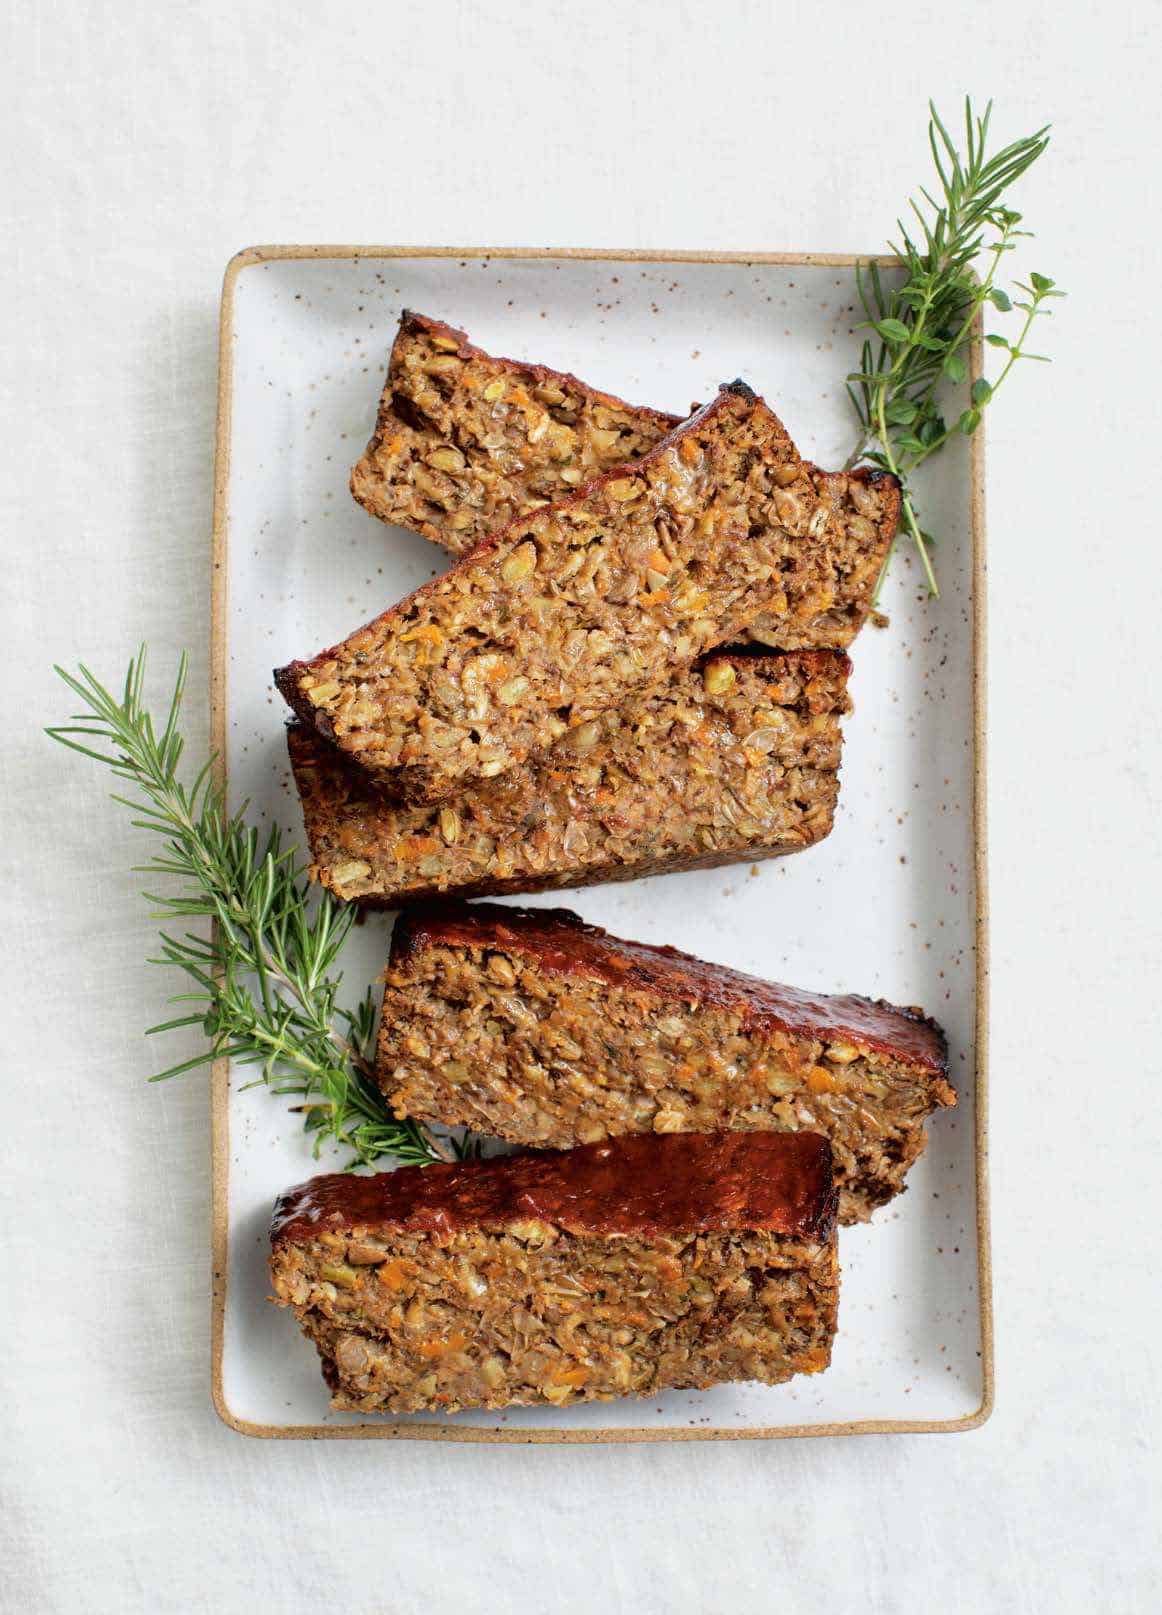 veggie lentil loaf served on a white plate with rosemary